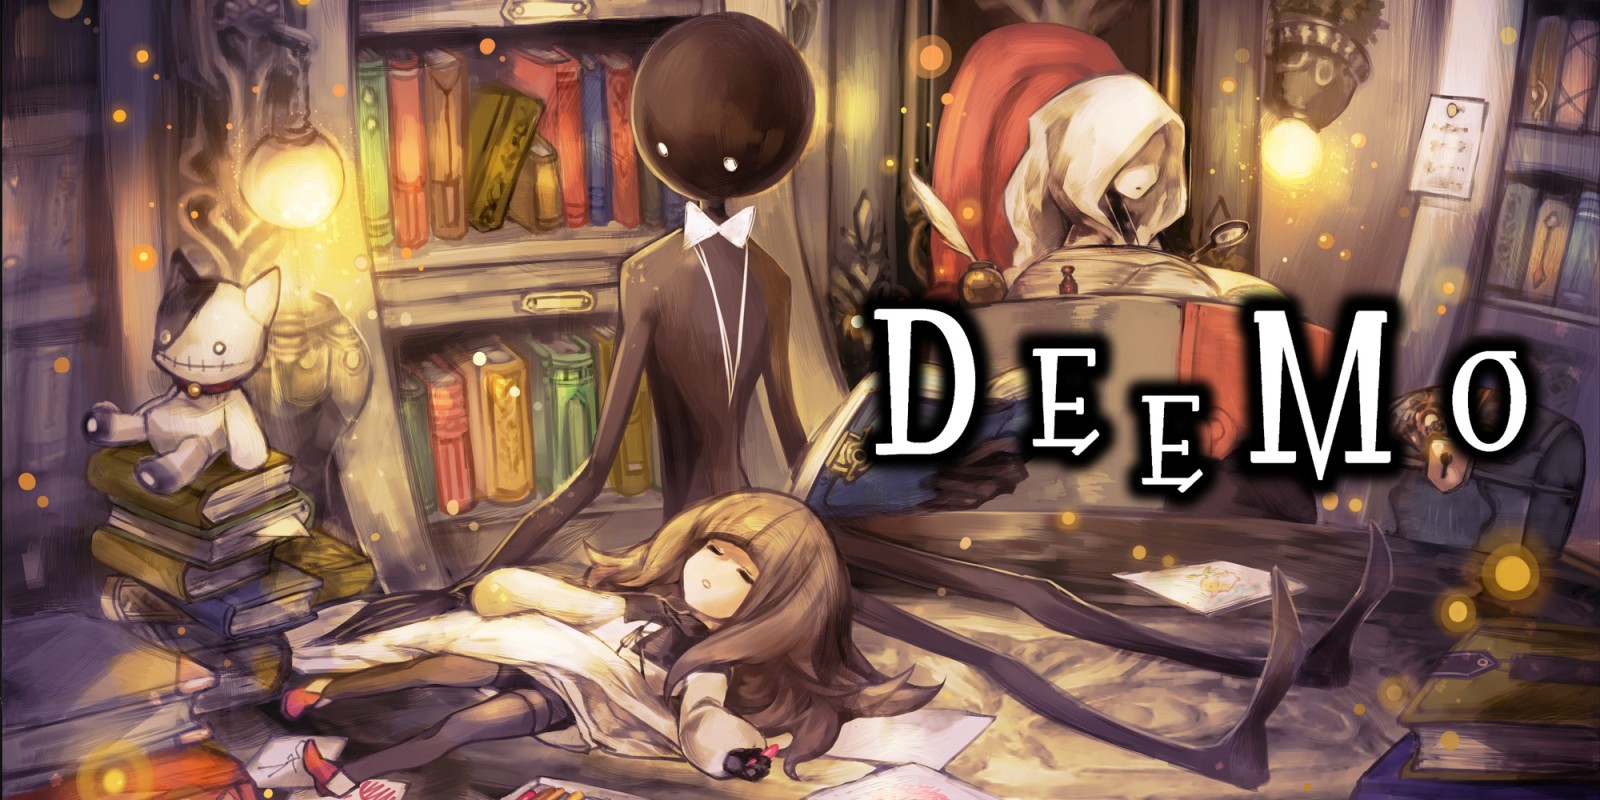 Deemo Ios Music Rhythm Game Now Free For First Time This Year (Reg. $2)